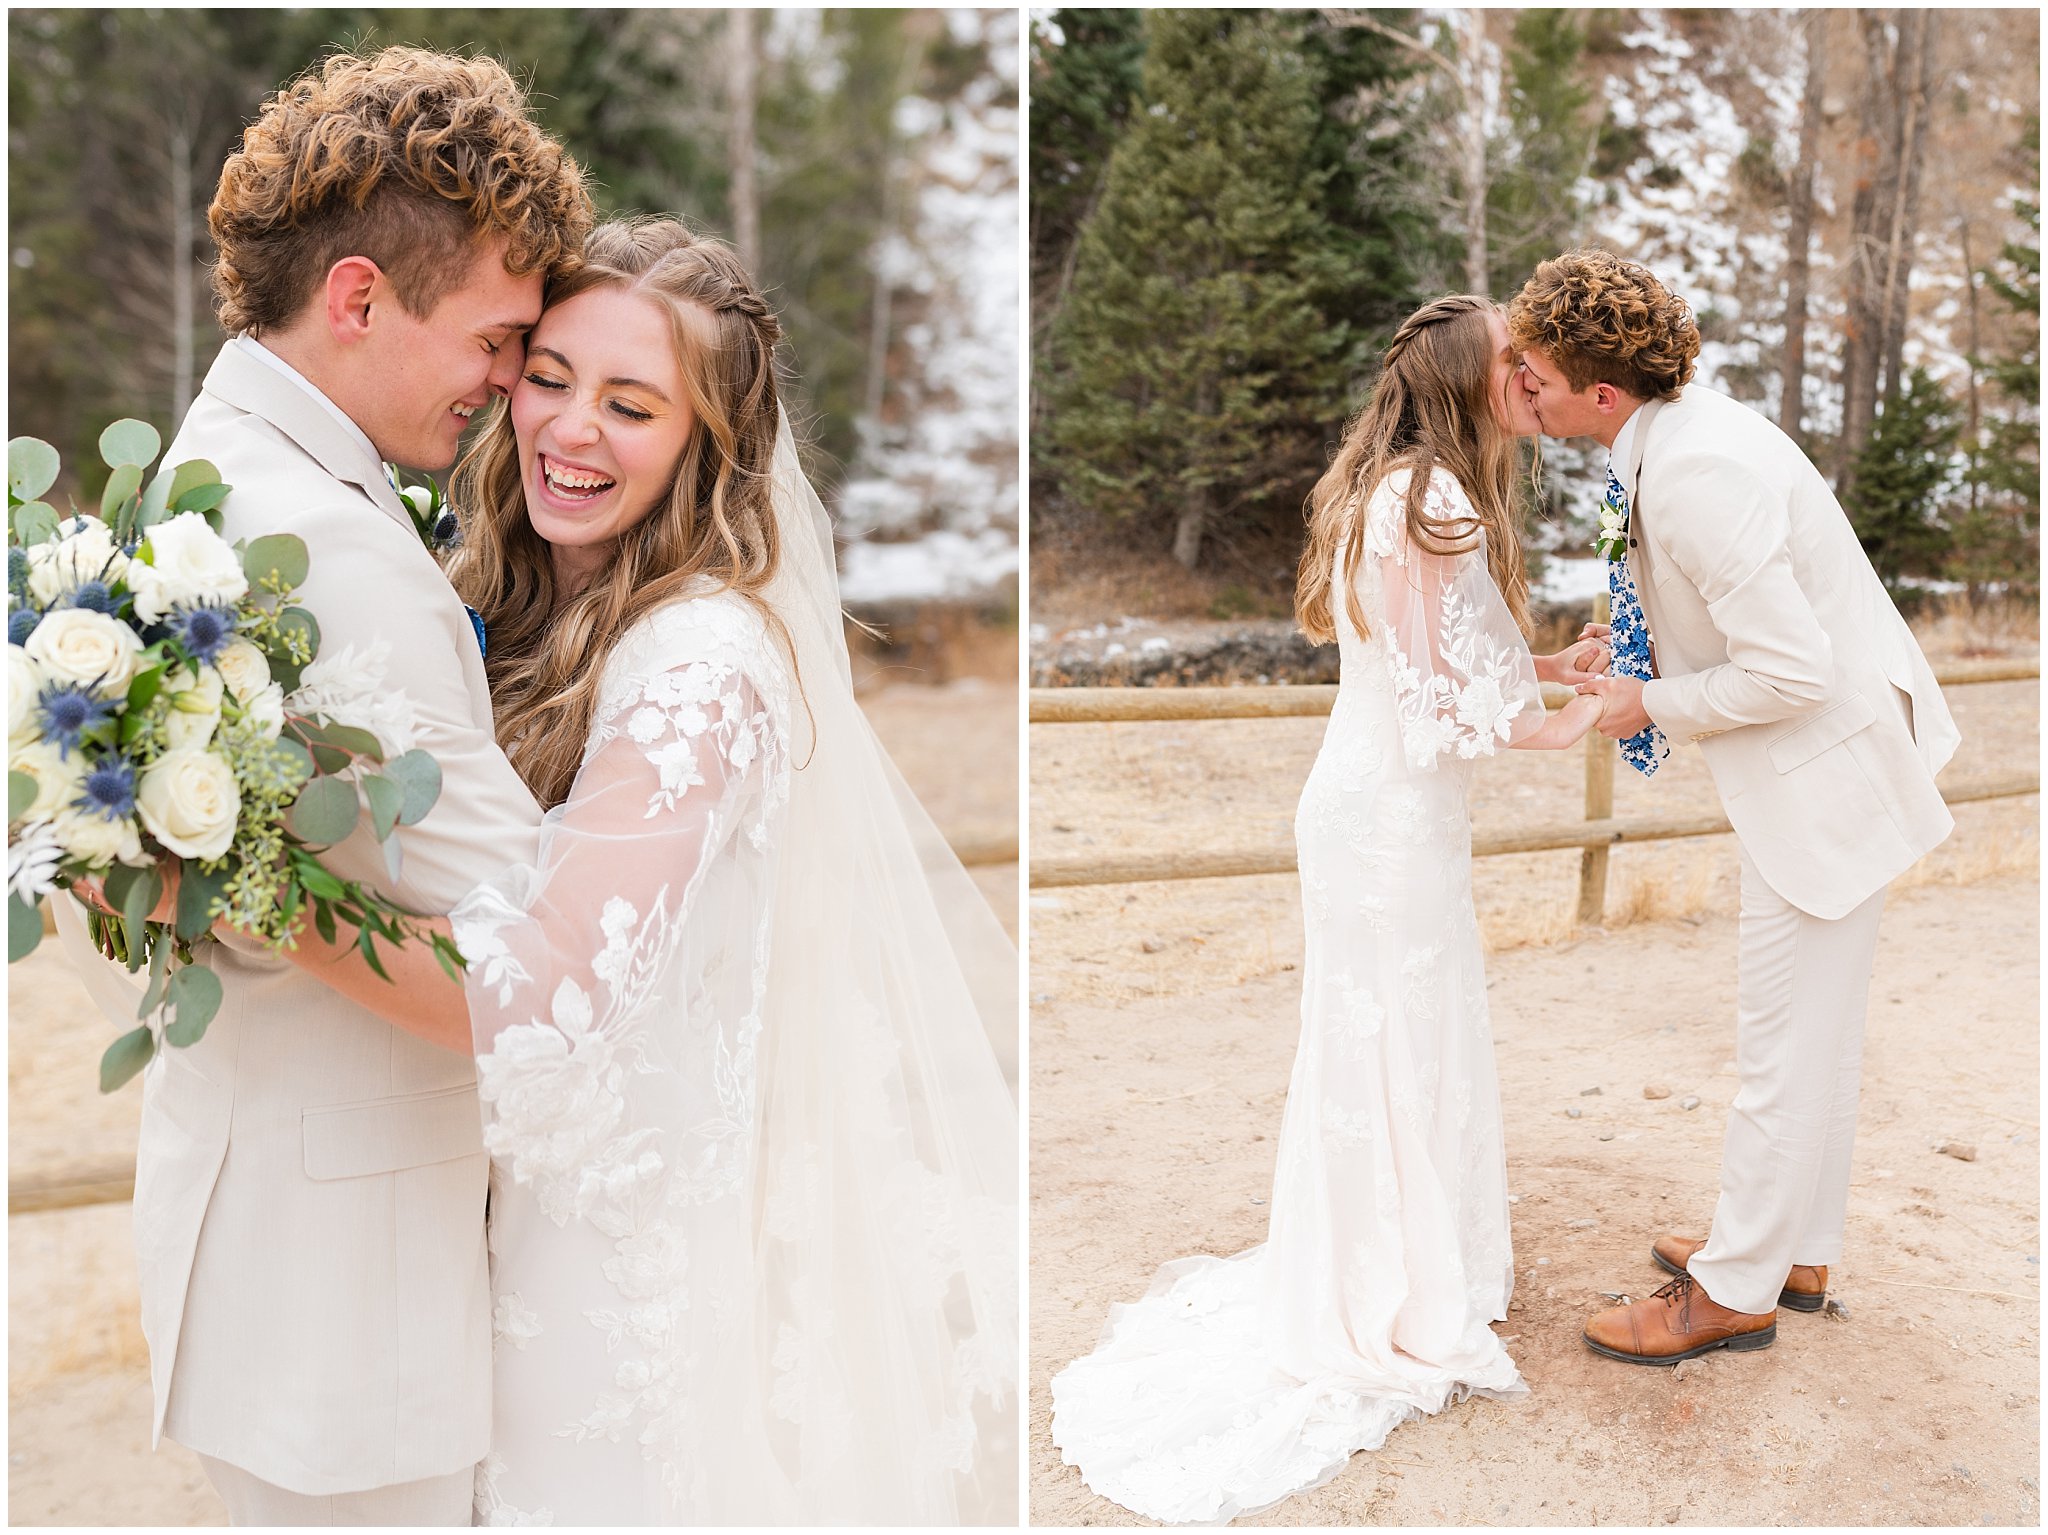 Bride and groom in the mountains during their first look wearing lace dress with veil and white floral bouquet and creme colored suit with blue tie | Tibble Fork Winter Formal Session | Jessie and Dallin Photography